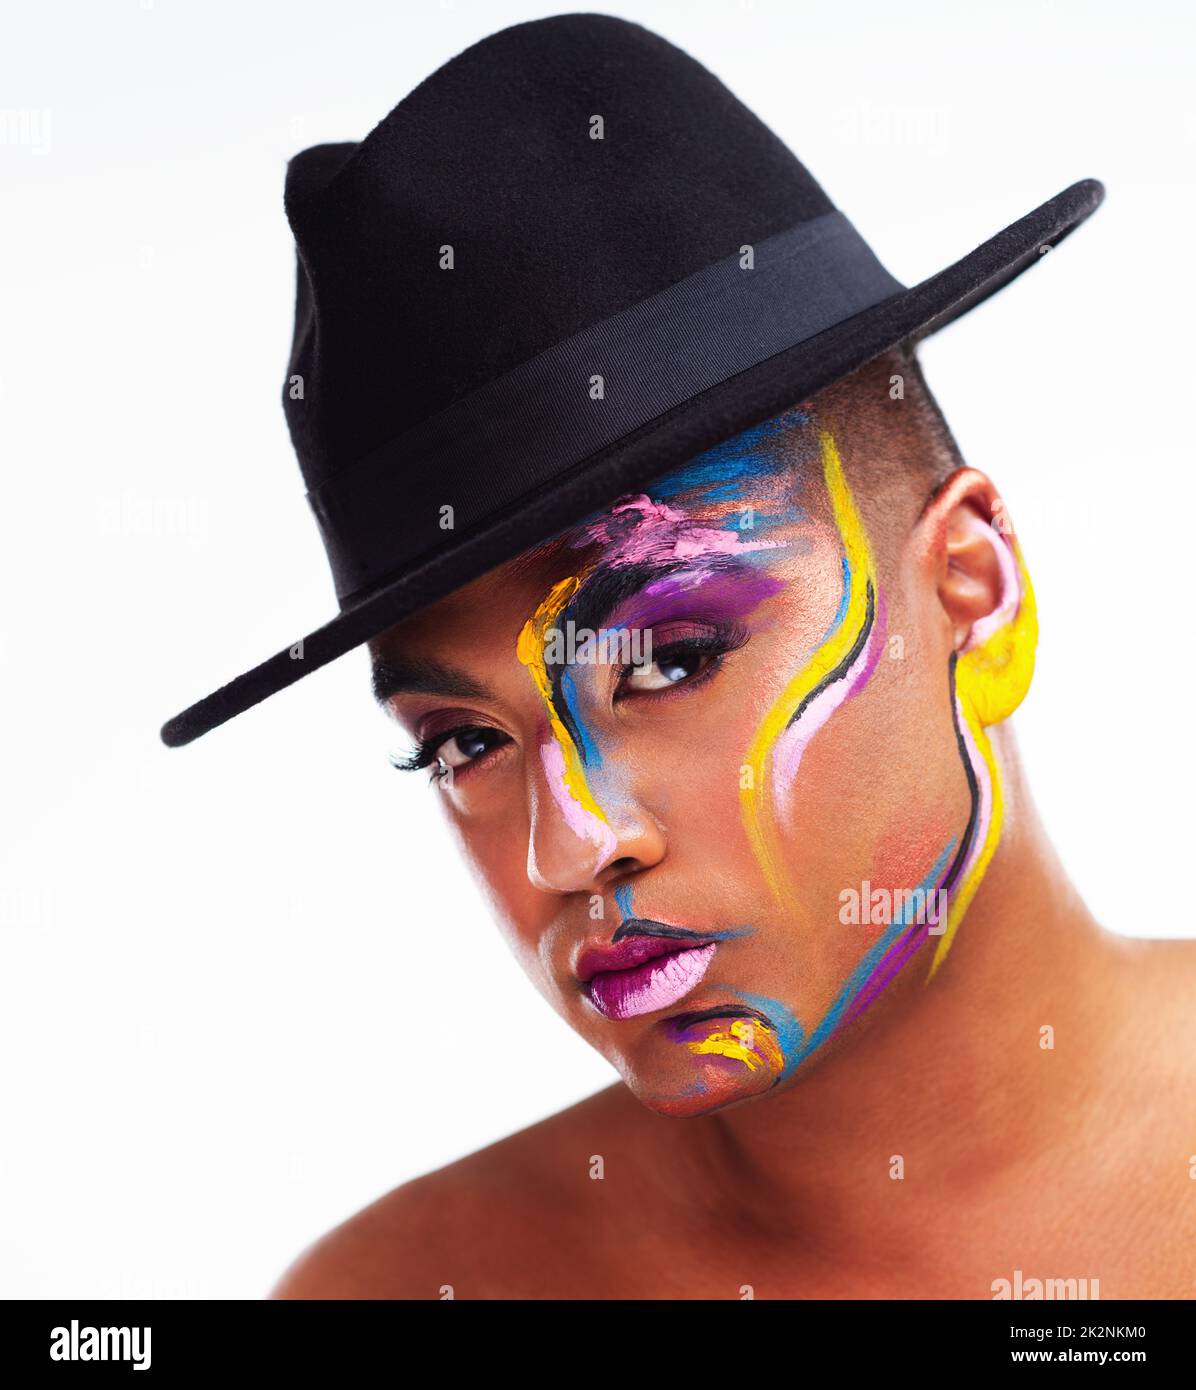 Be unapologetically you. Portrait of a gender fluid young man wearing face paint and a hat posing against a white background. Stock Photo